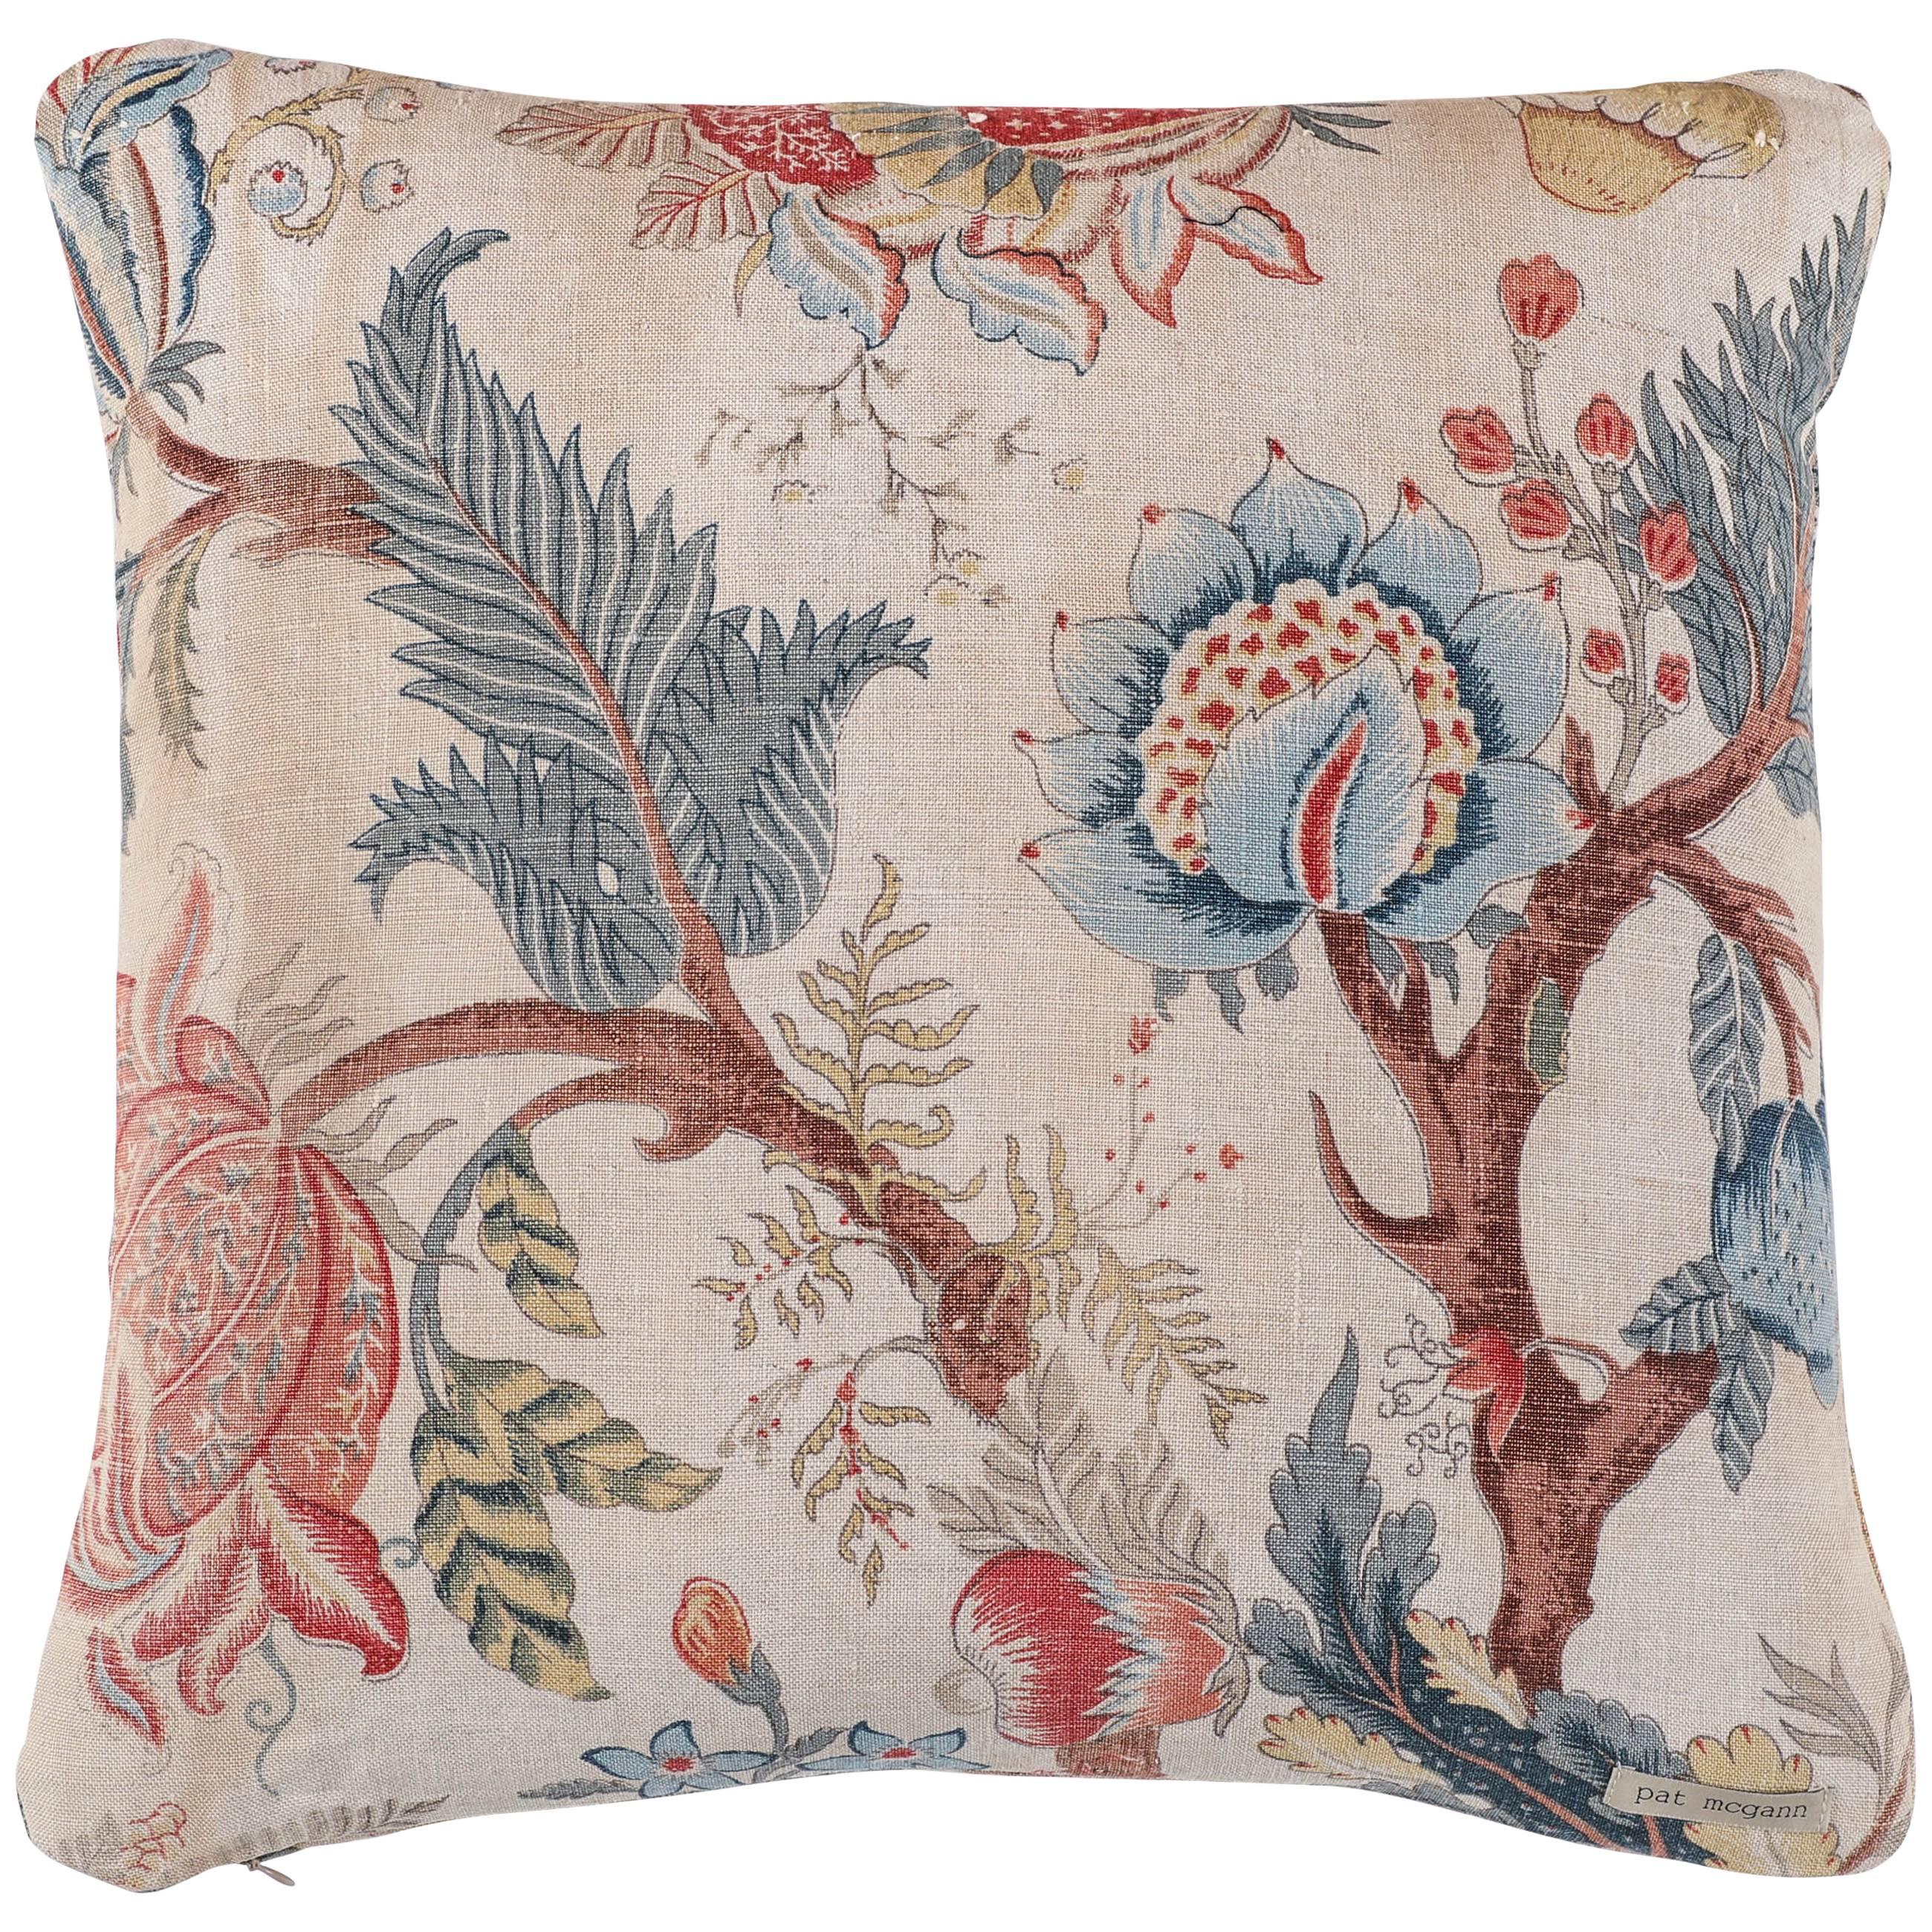 Vintage Floral Linen Pillow Double-sided For Sale